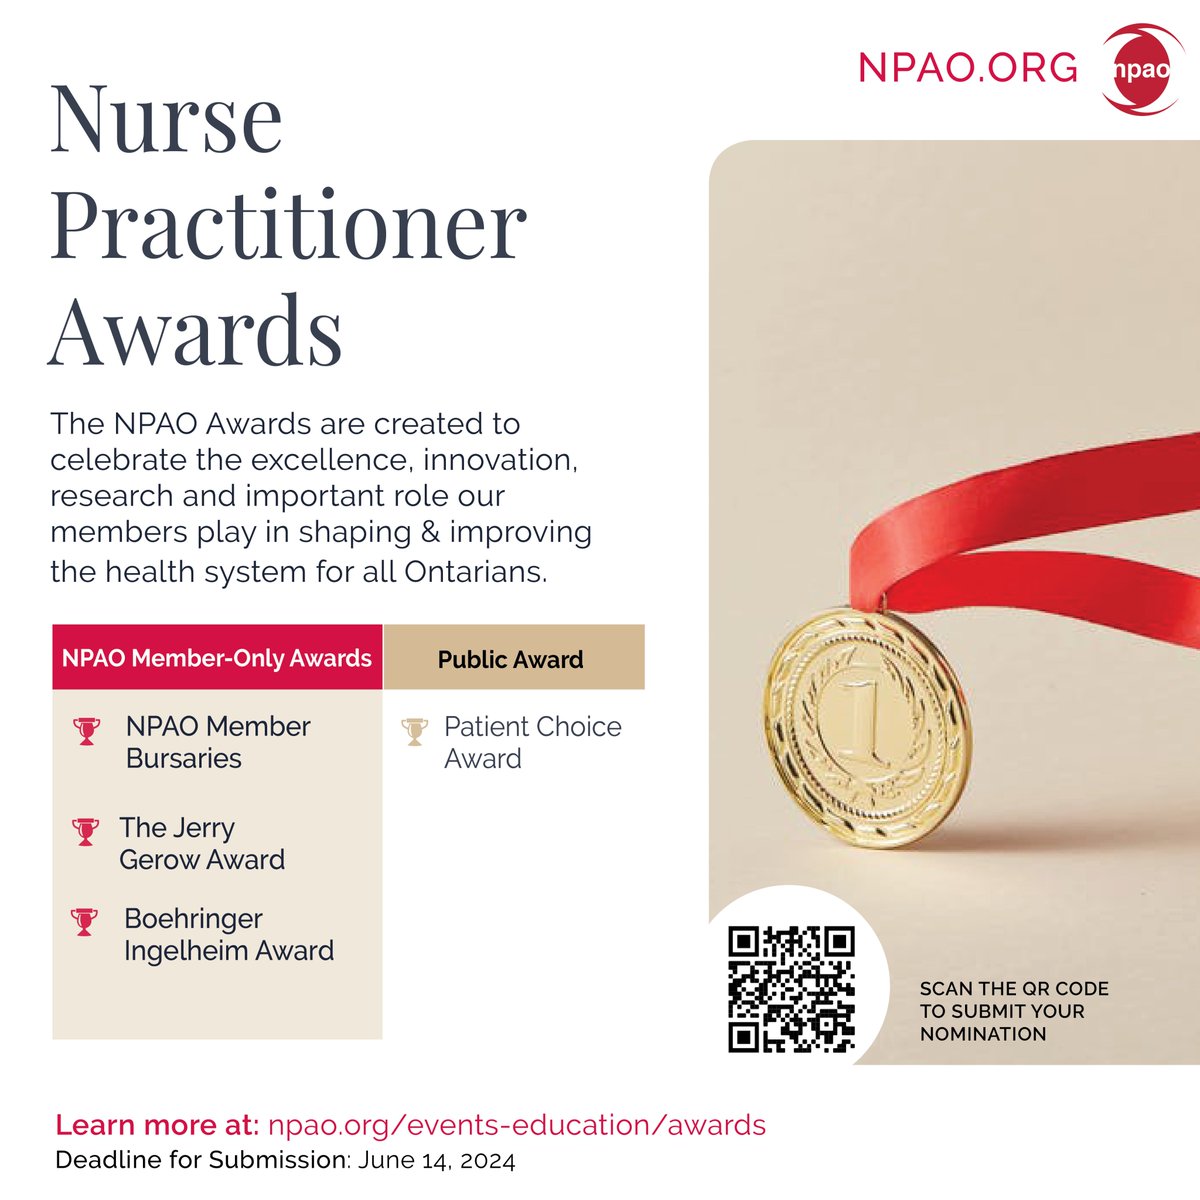 Calling all healthcare trailblazers! The NPAO Awards honour excellence, innovation, & research, recognizing our members' pivotal role in shaping Ontario's #healthcare landscape. Don't miss the chance to submit your nomination! npao.org/awards #NPAOAwards #OntarioHealth